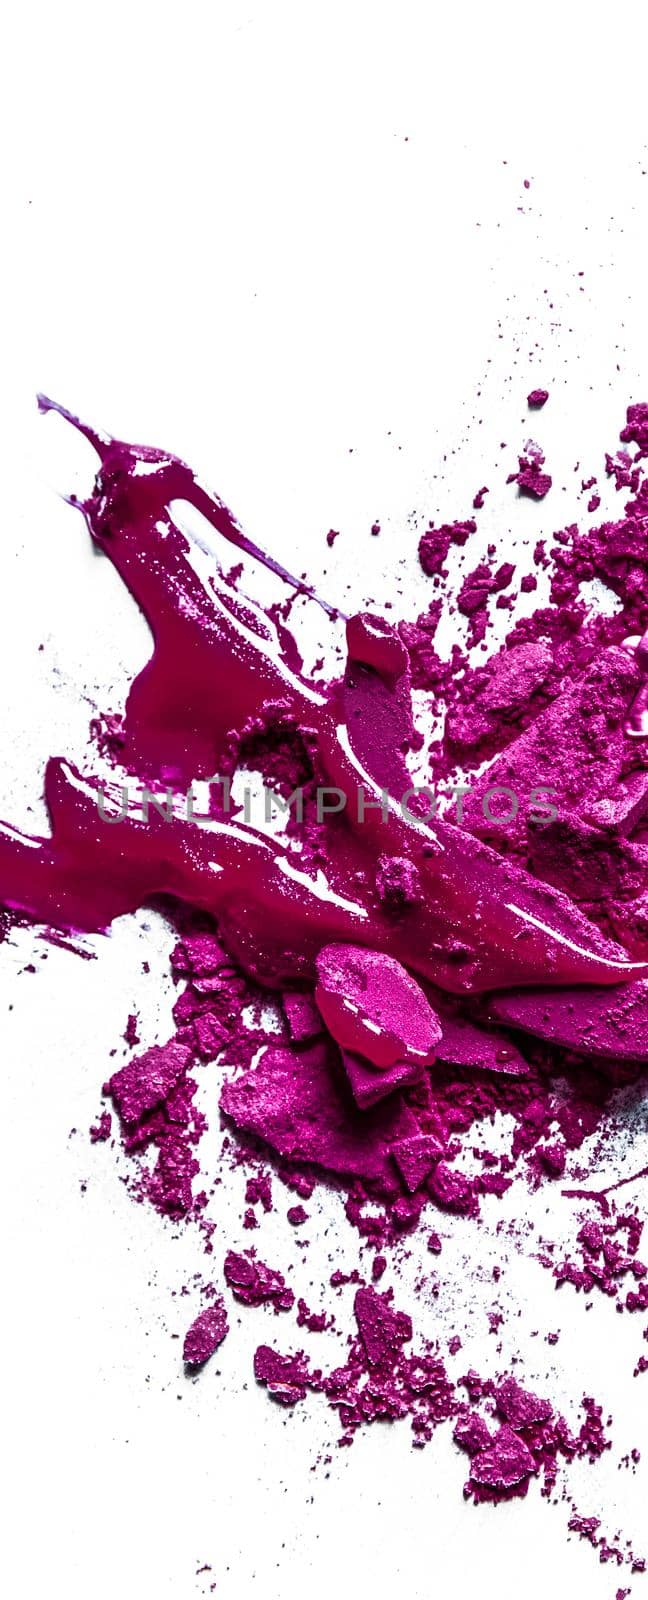 Crushed eyeshadows, lipstick and powder isolated on white background by Anneleven